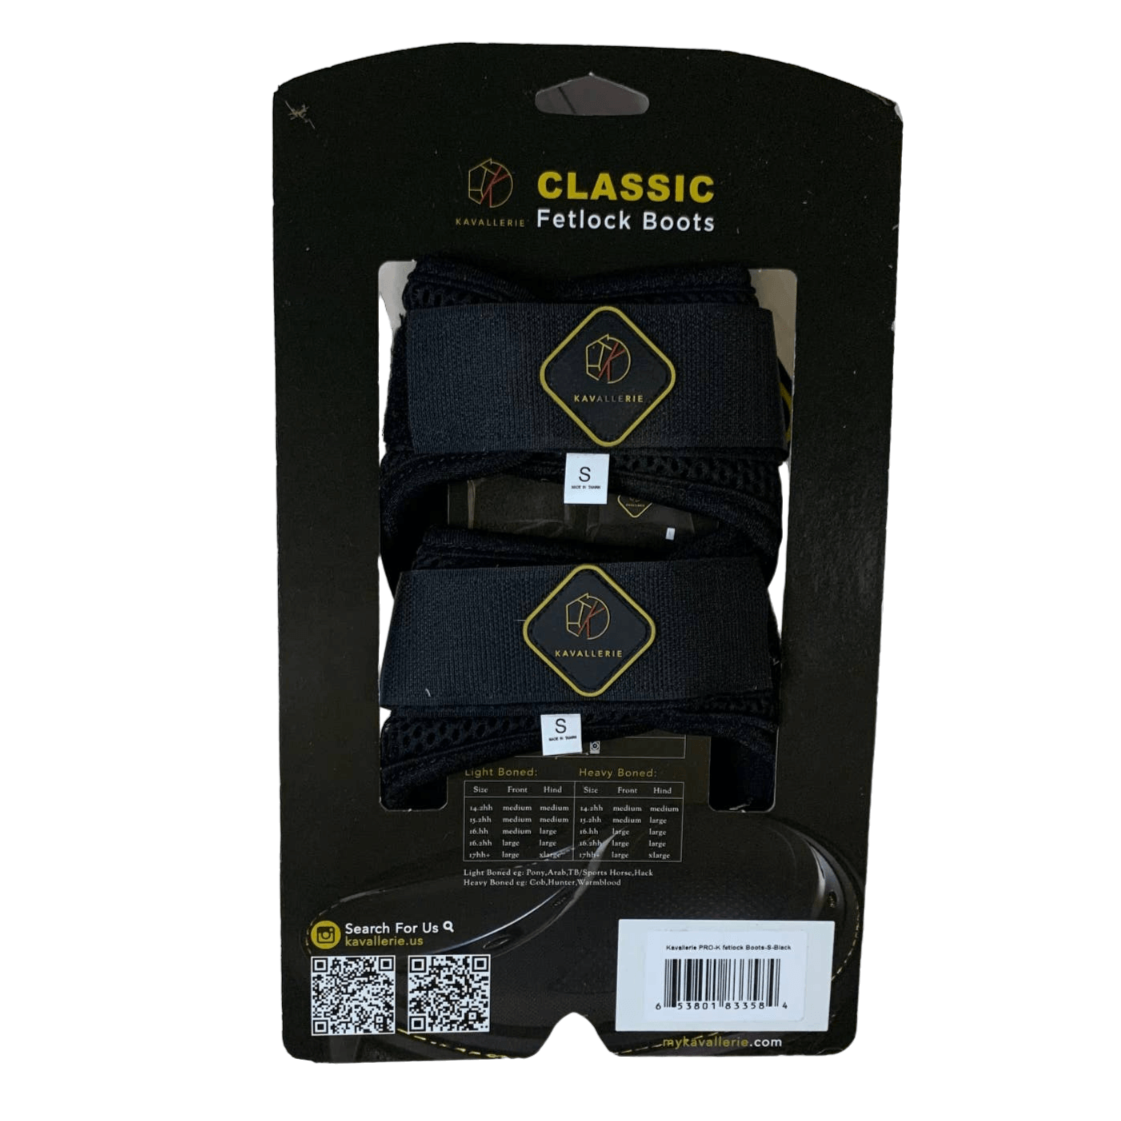 Kavalliere Pro-K Classic Fetlock Boots in Black - Small